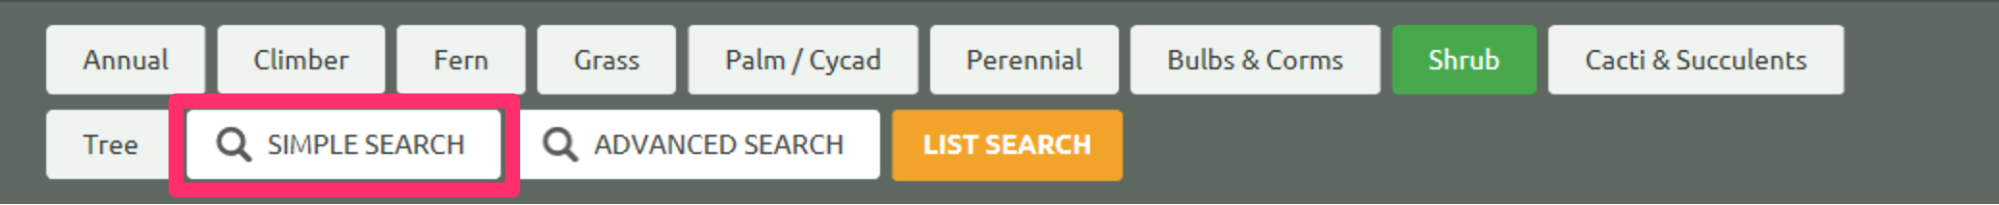 PlantFile database, Simple search option